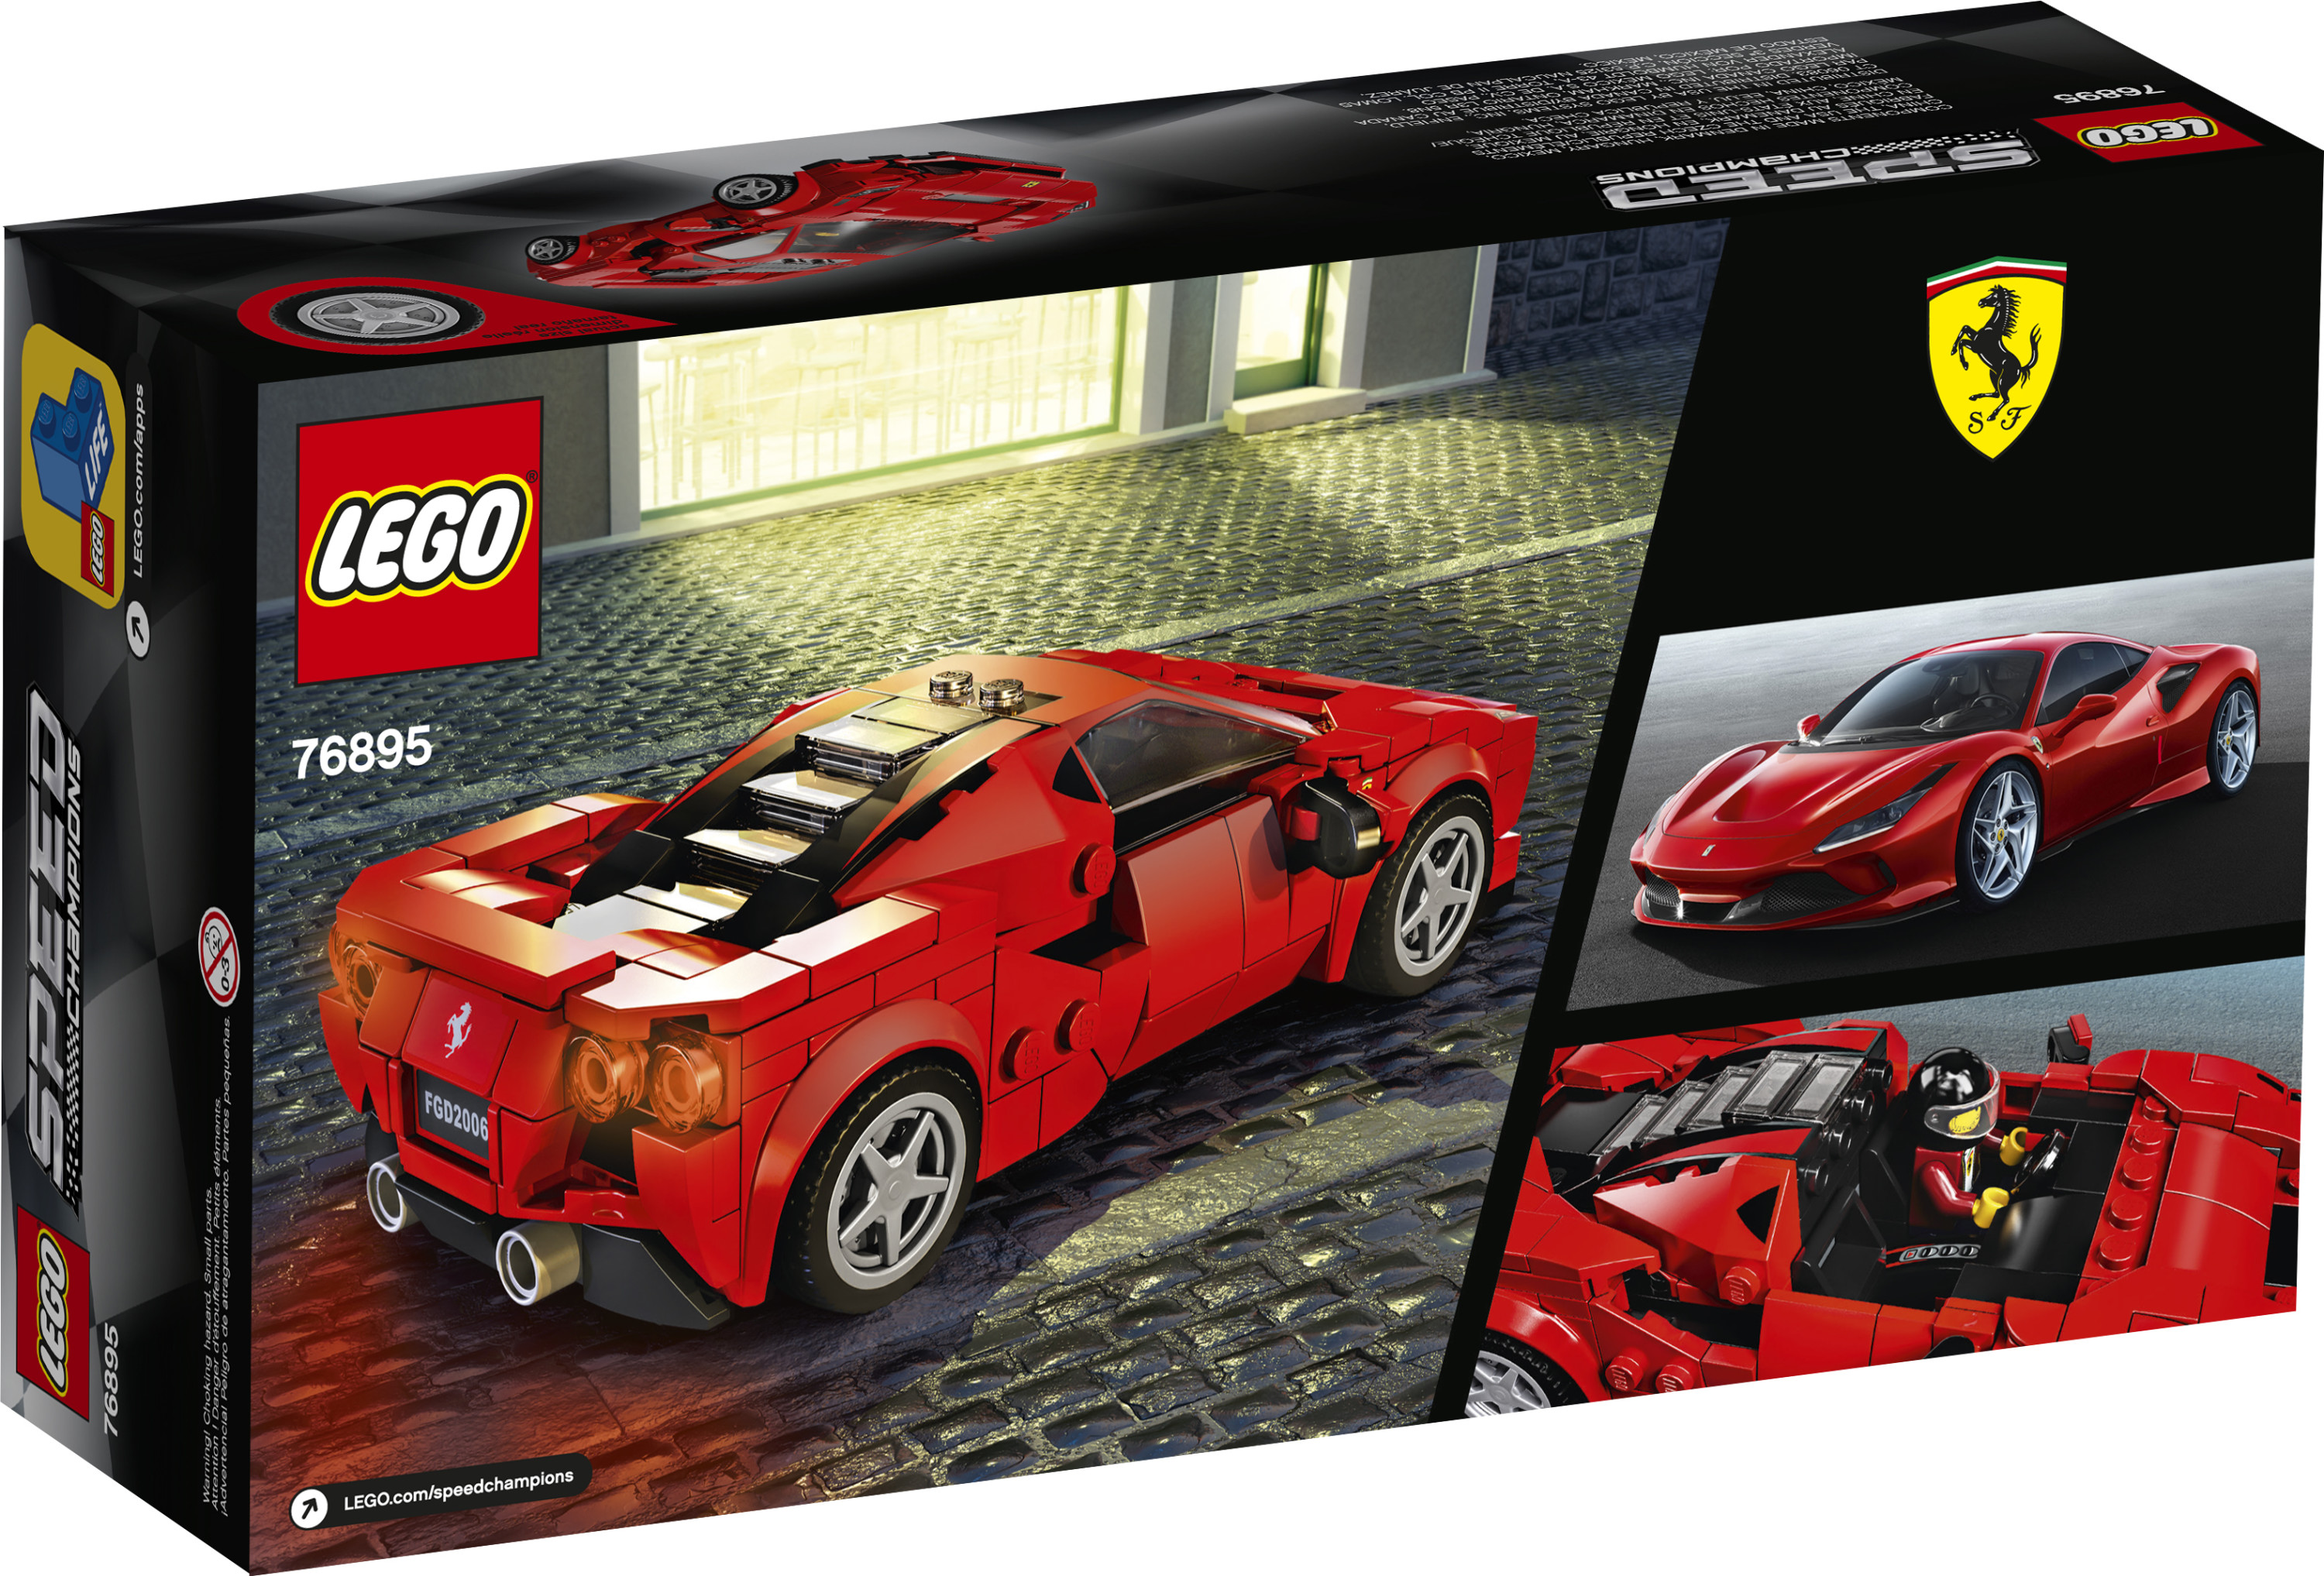 LEGO Speed Champions 76895 Ferrari F8 Tributo Racing Model Car, Vehicle Building Car (275 pieces) - image 5 of 12